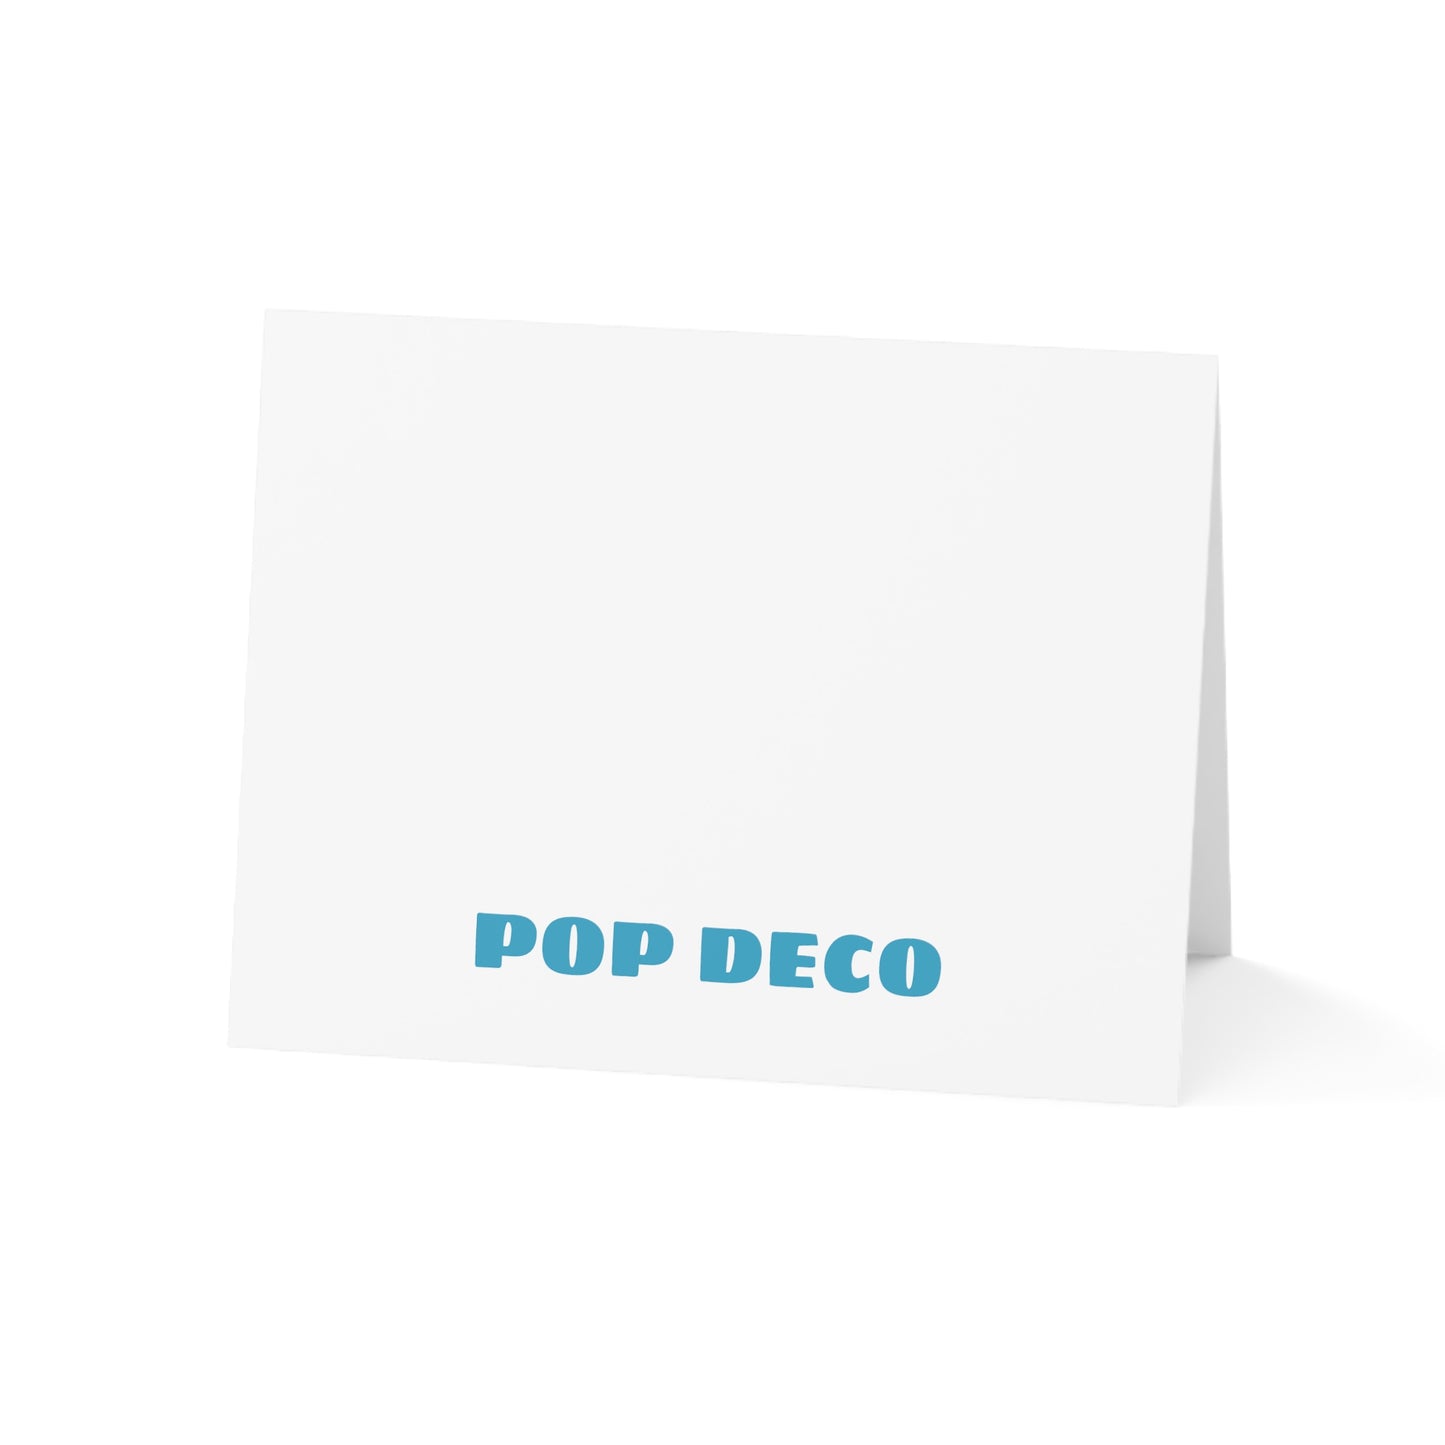 POP DECO ONE - Greeting Cards (1, 10, 30, and 50pcs)